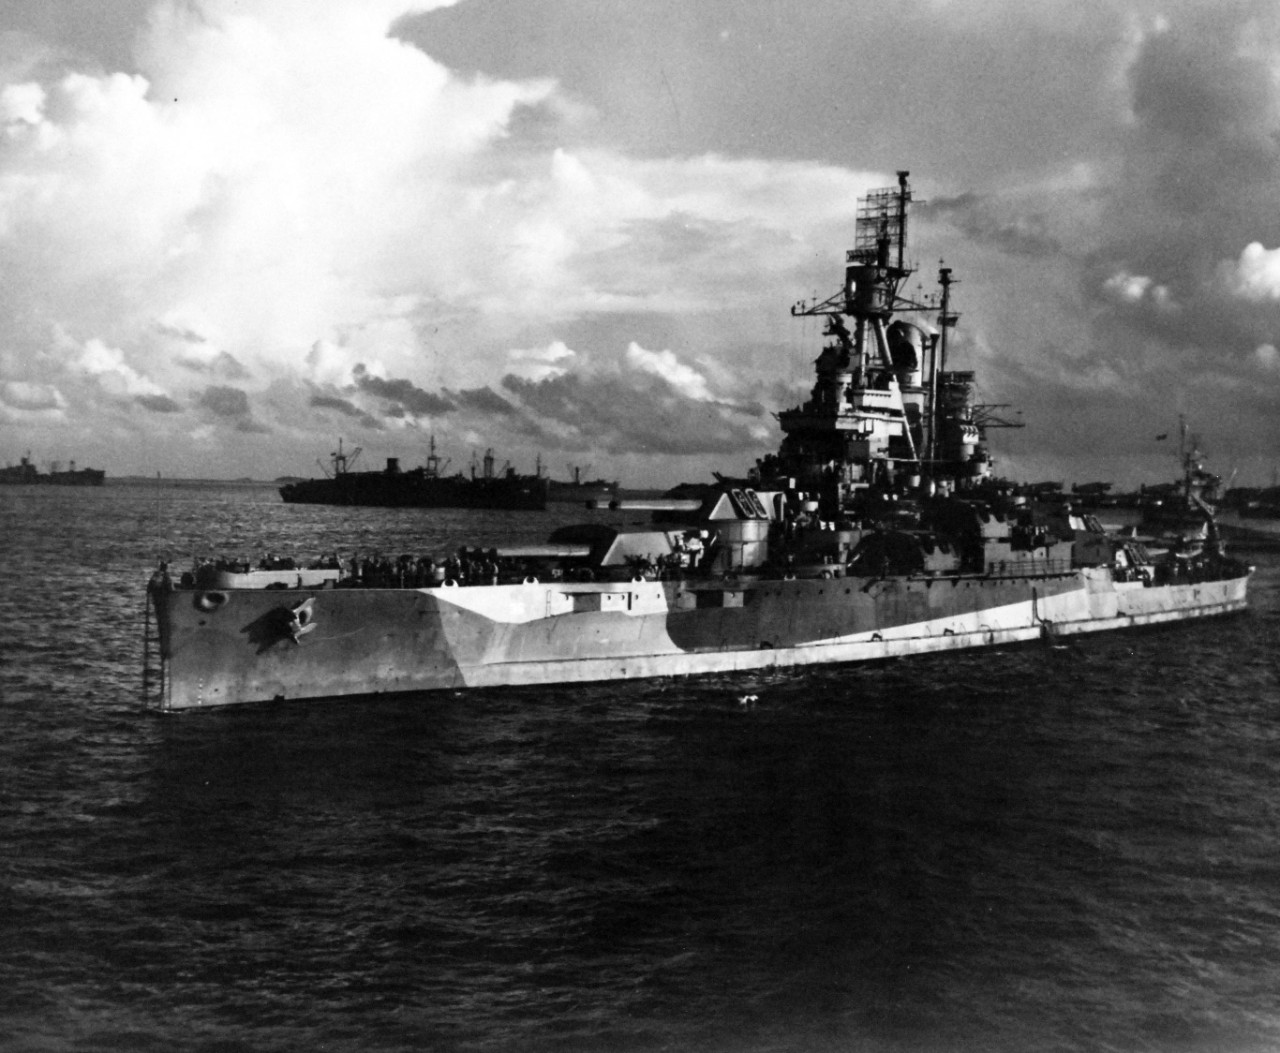 80-G-263992:  USS Nevada (BB-36), February 1945.  Nevada as seen from USS Sargent Bay (CVE 83), February 6, 1945.  Official U.S. Navy Photograph, now in the collections of the National Archives.